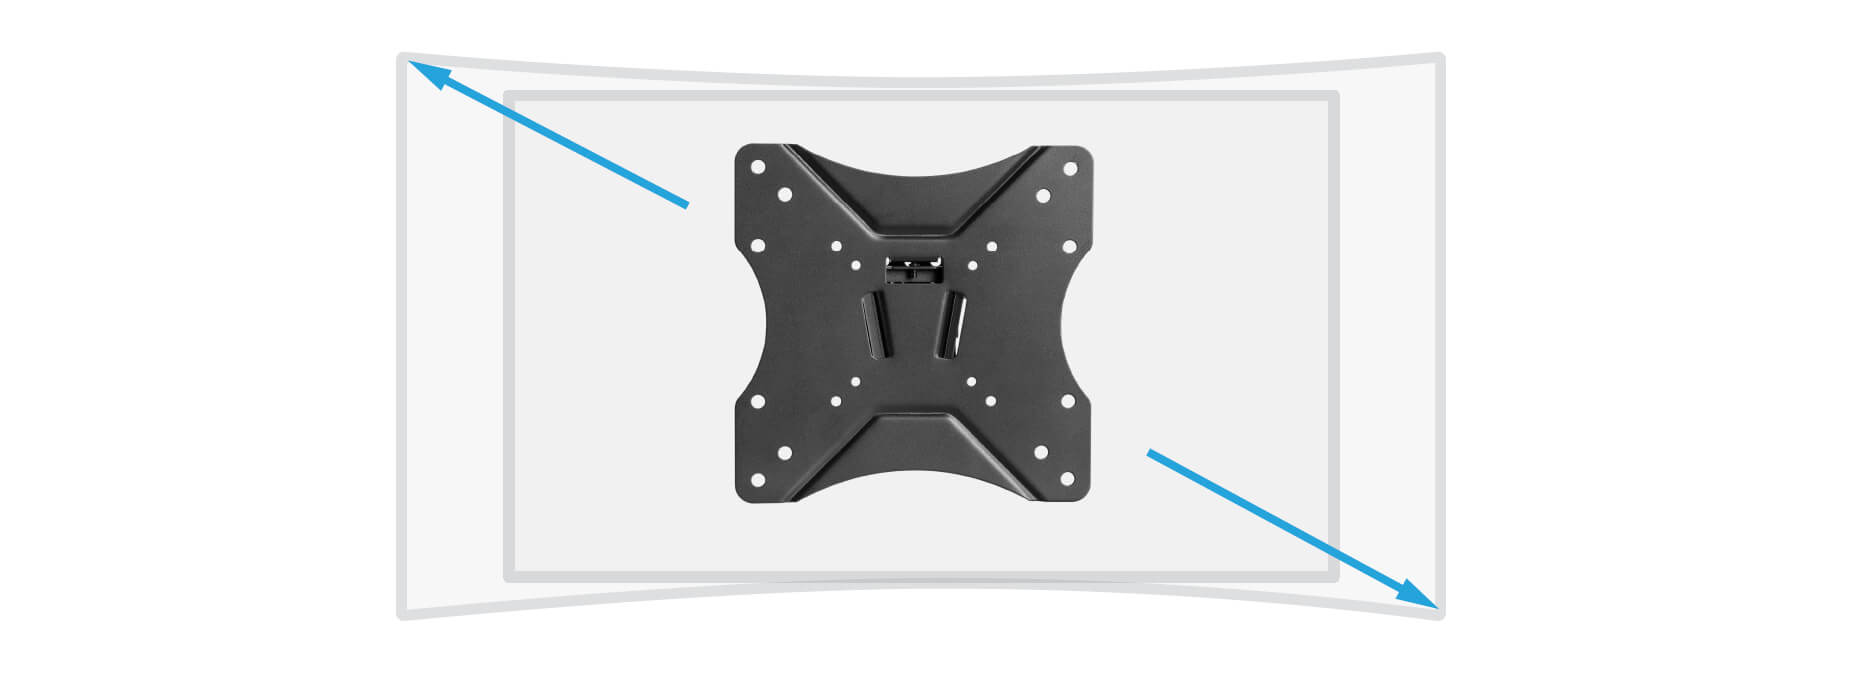 Monoprice Platinum Full Motion TV Wall Mount Bracket For 23" To 42"  TVs up to 77lbs, Max VESA 200x200 